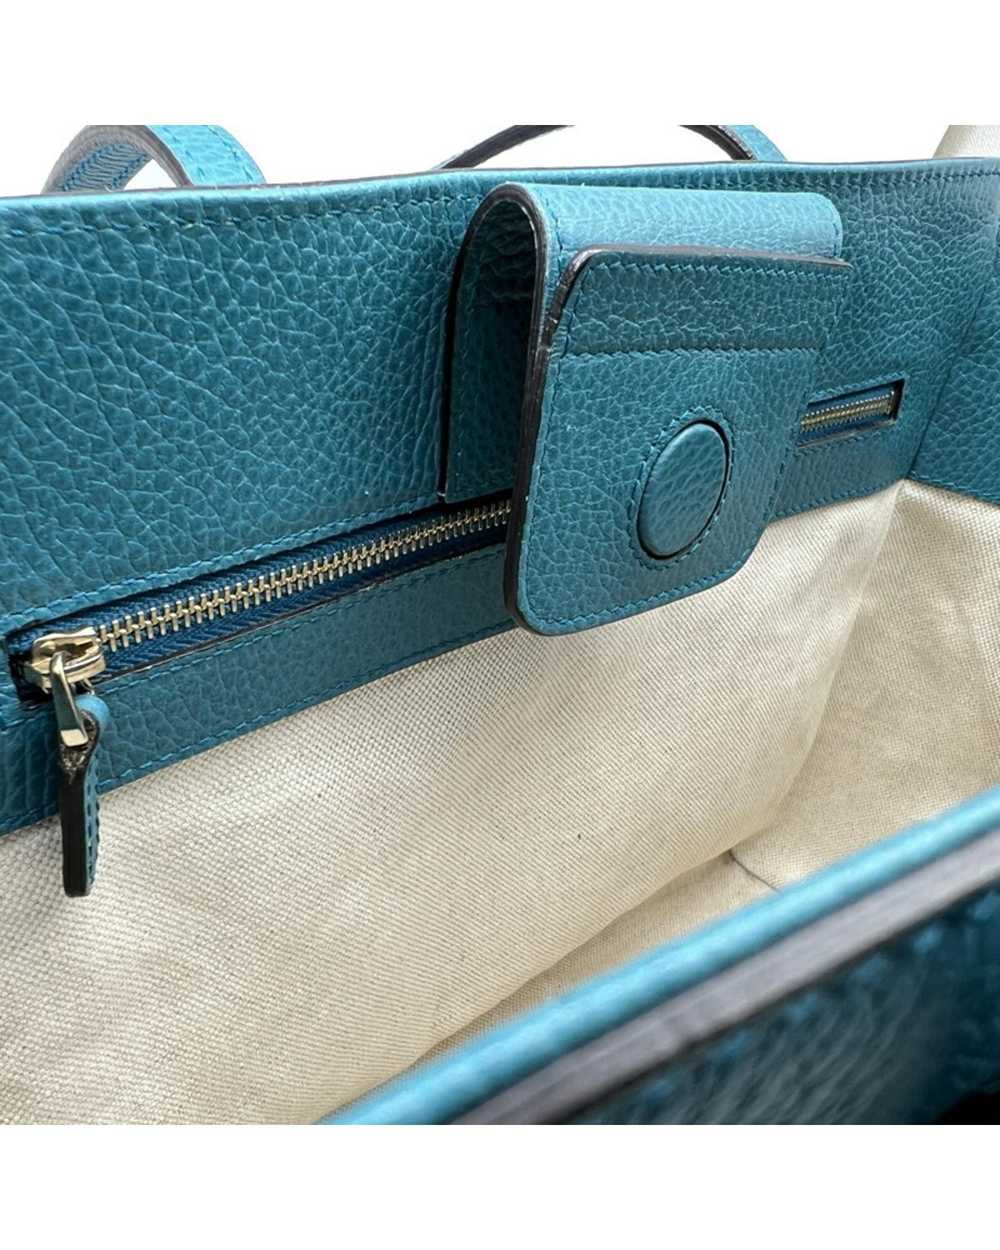 Gucci Blue Leather Swing Bag - image 8